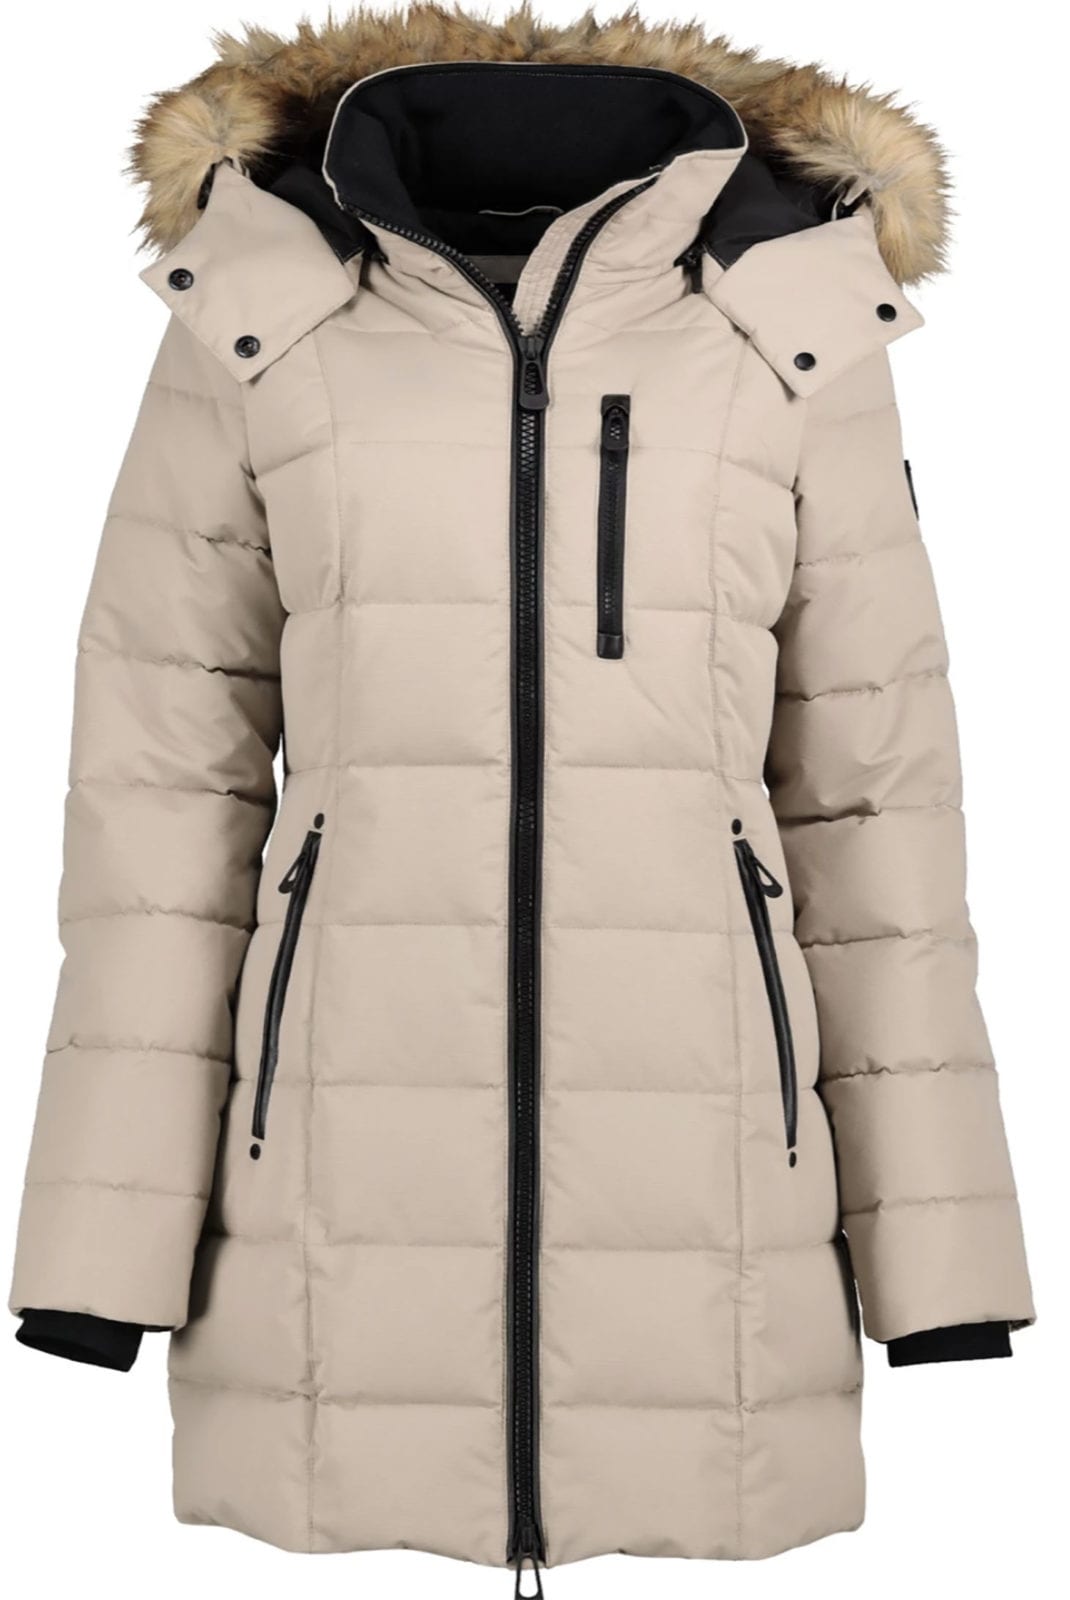 Your Winter Coat Guide: Puffers, Parkas, Trenches, & More! - Jillian Harris